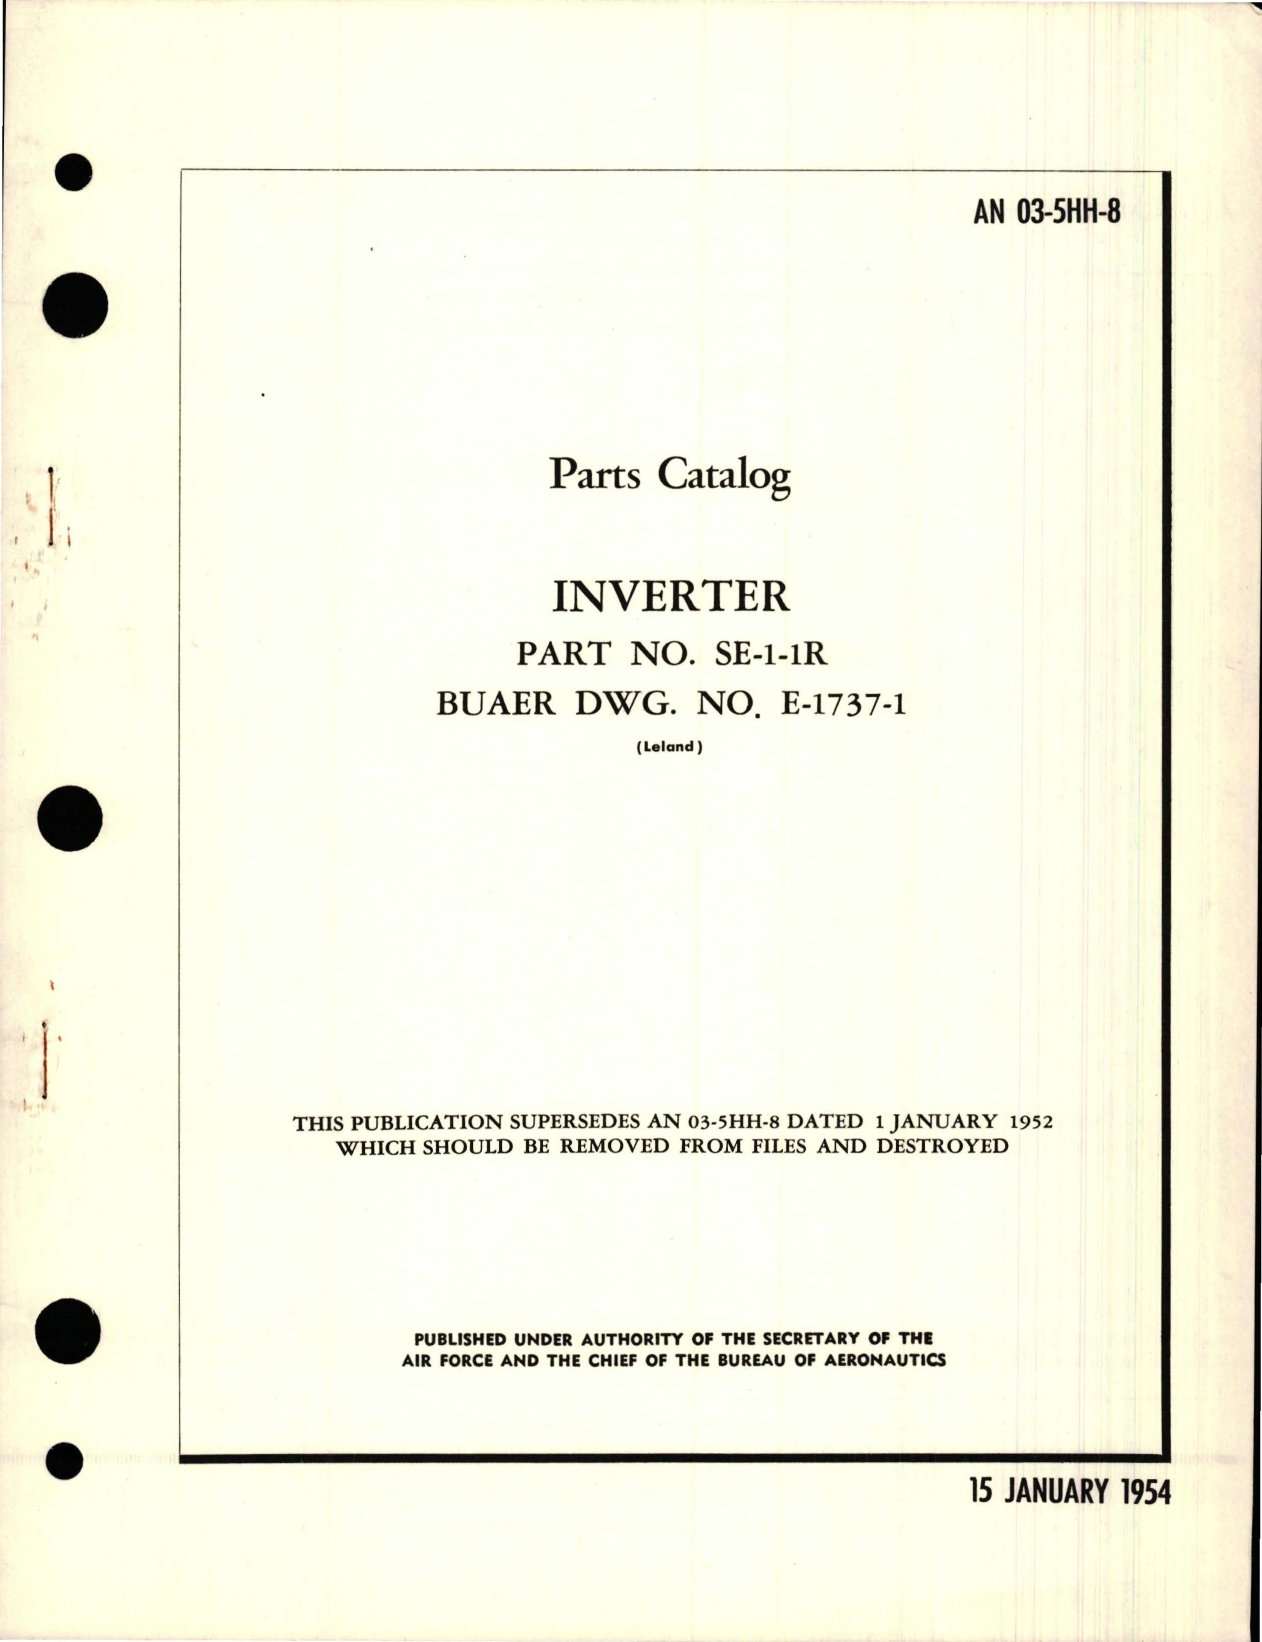 Sample page 1 from AirCorps Library document: Parts Catalog for Inverter - Part SE-1-1R